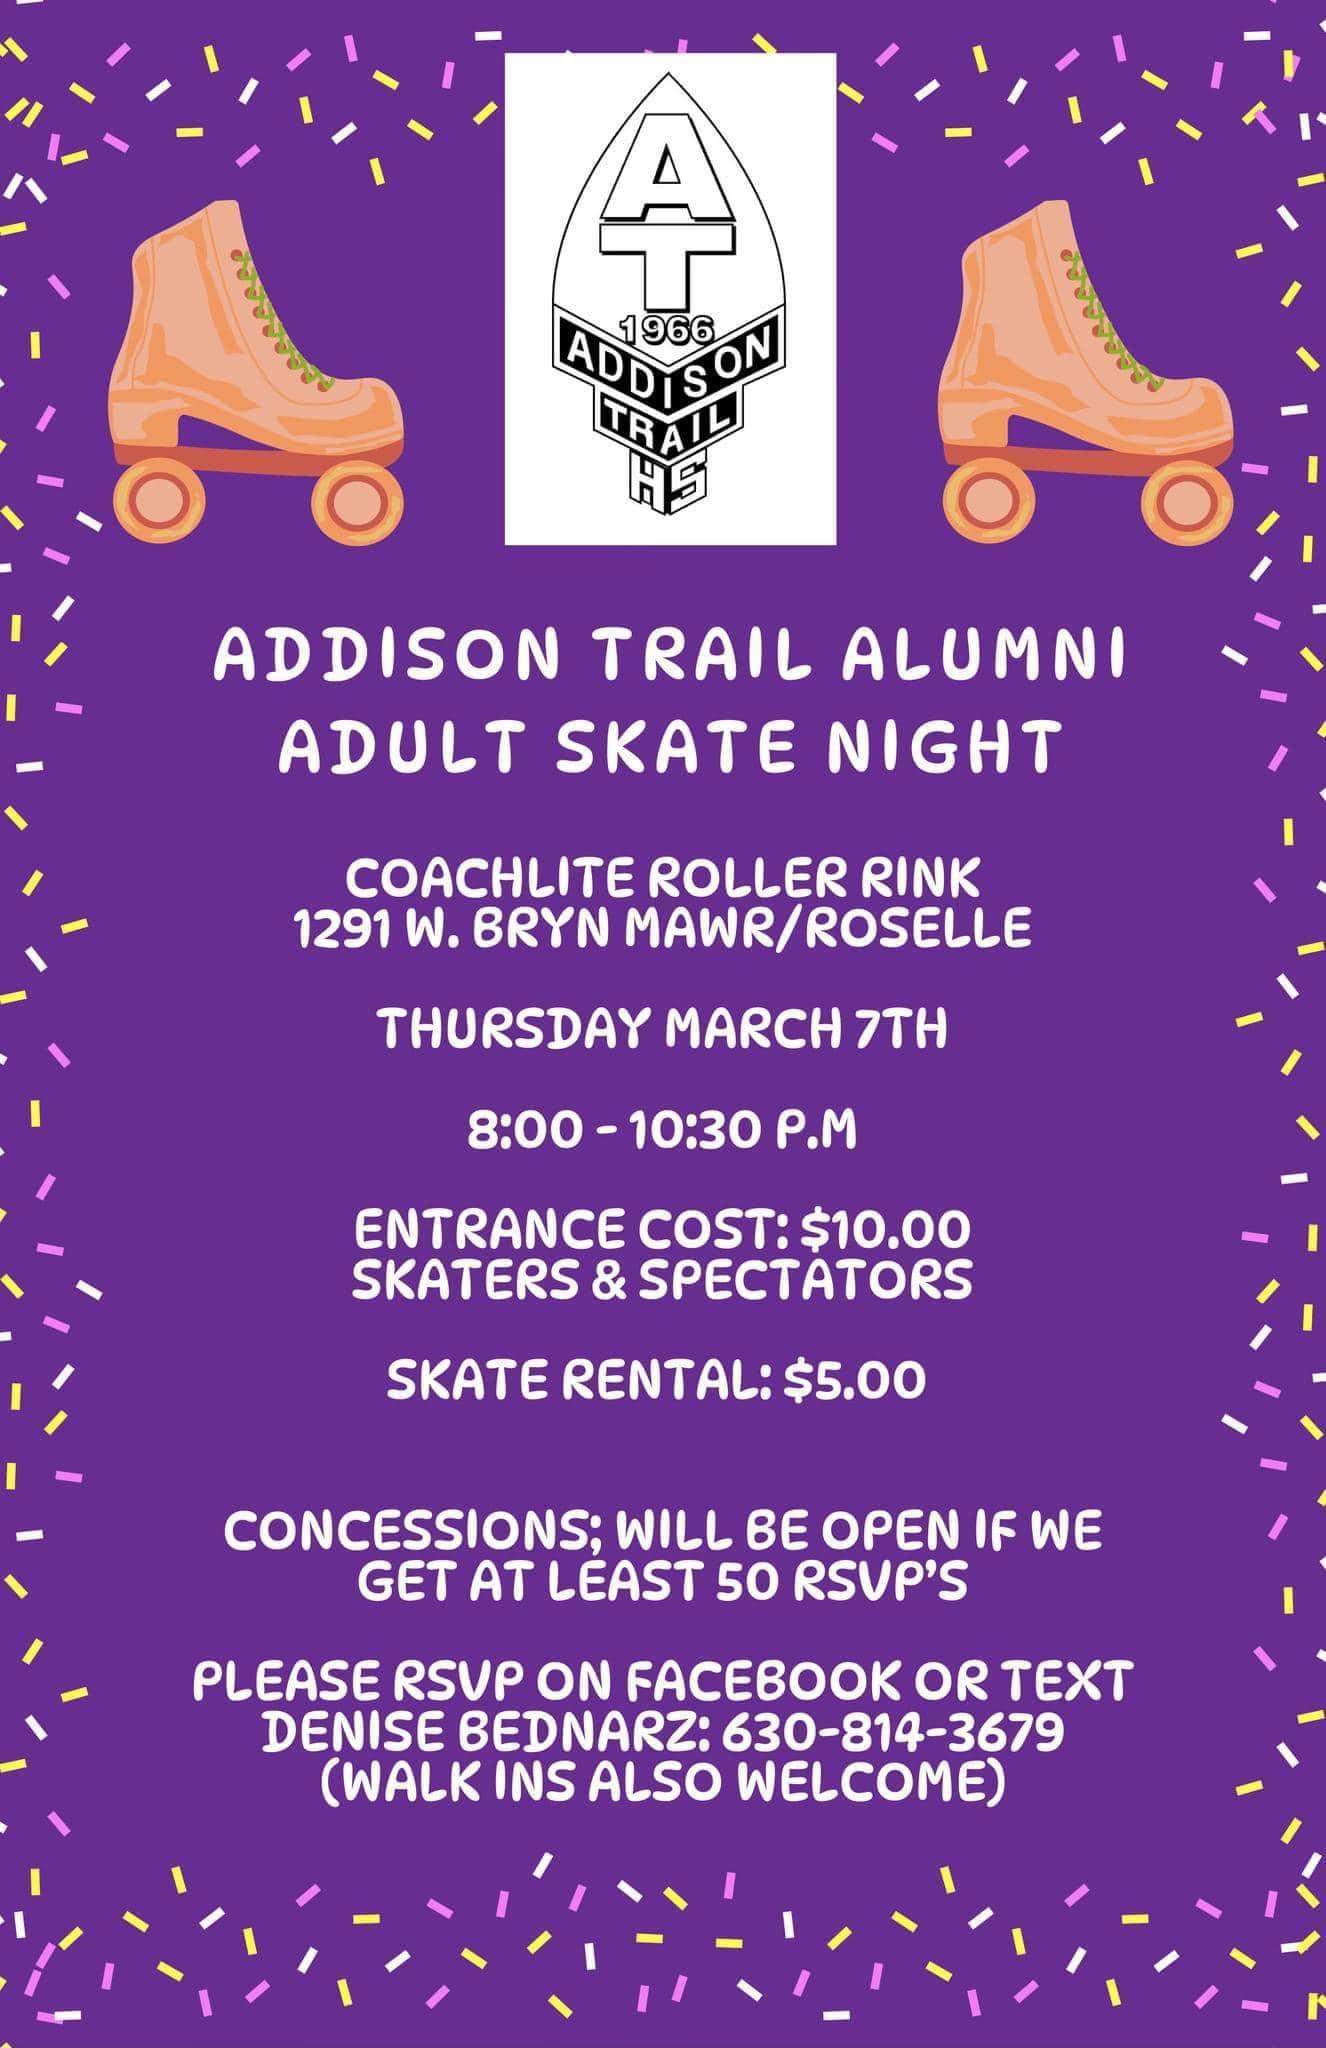 Addison Trail alumni invited to attend roller skating event